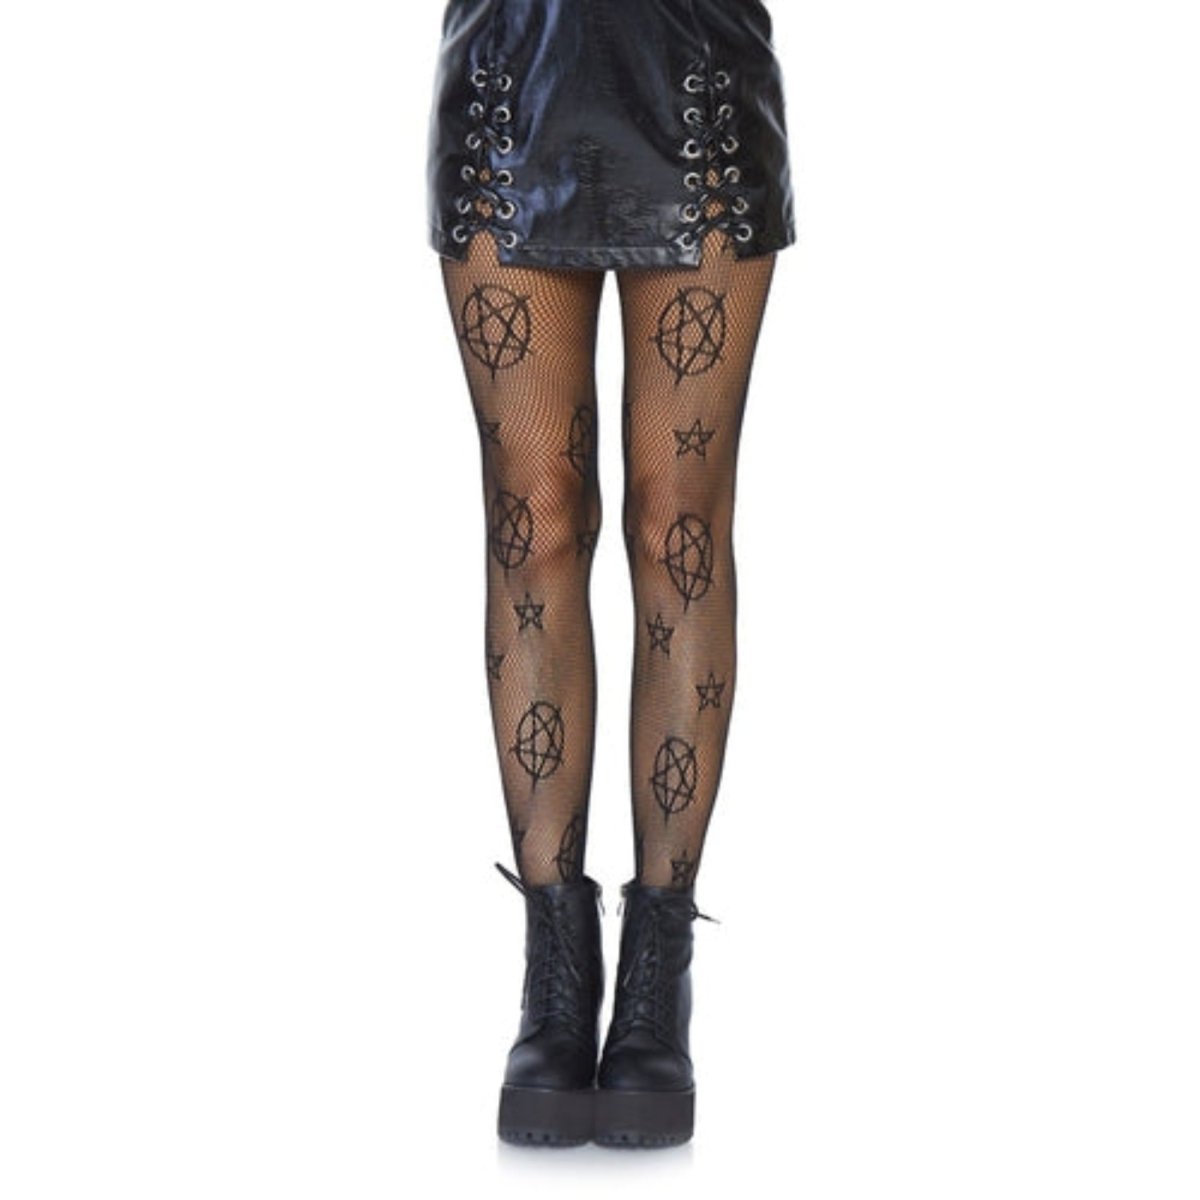 Occult Net Tights - worldclasscostumes